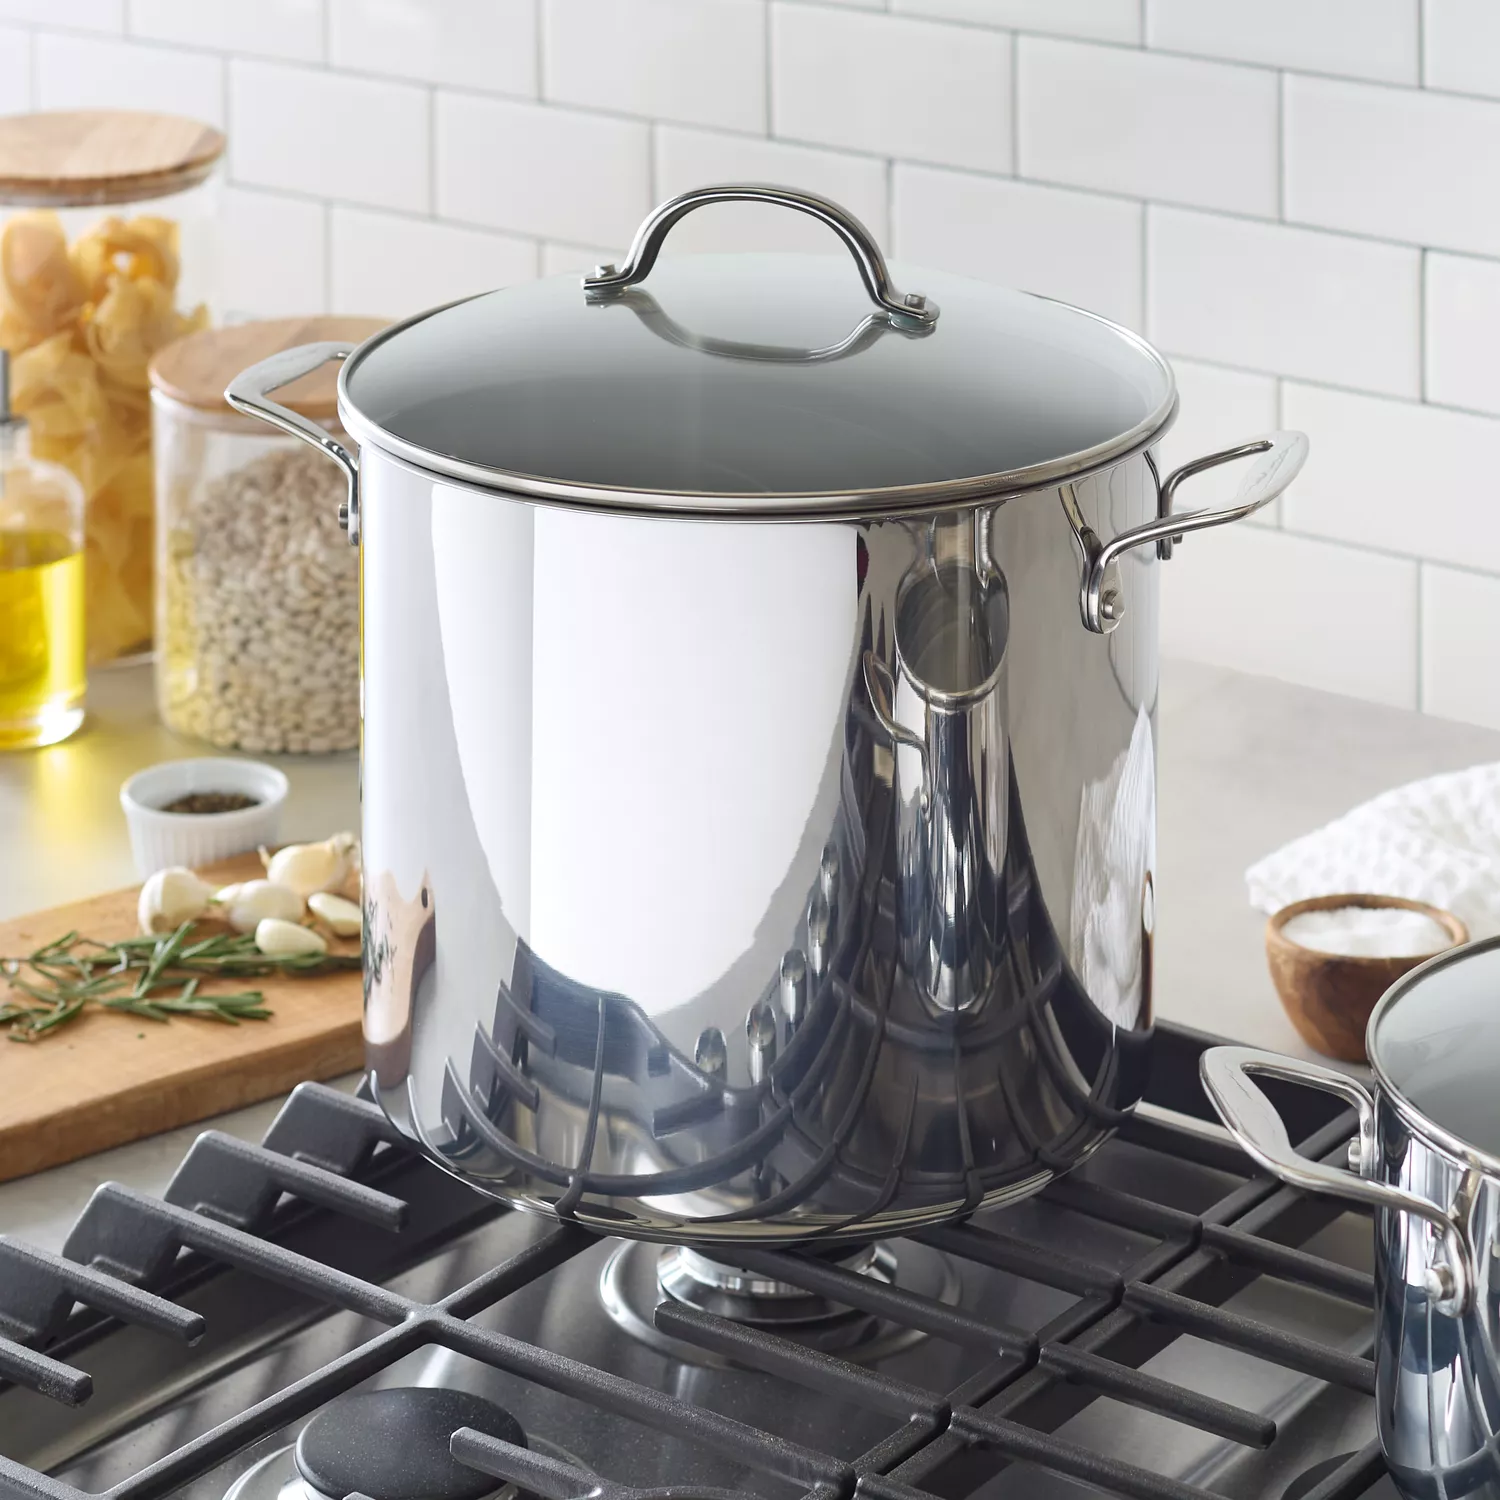 Eater x Heritage Steel 8 Quart Stock Pot | Made in USA | 5-Ply Fully Clad  Stainless Steel Stock Pot | Stay Cool Handle Design | Induction Pot 